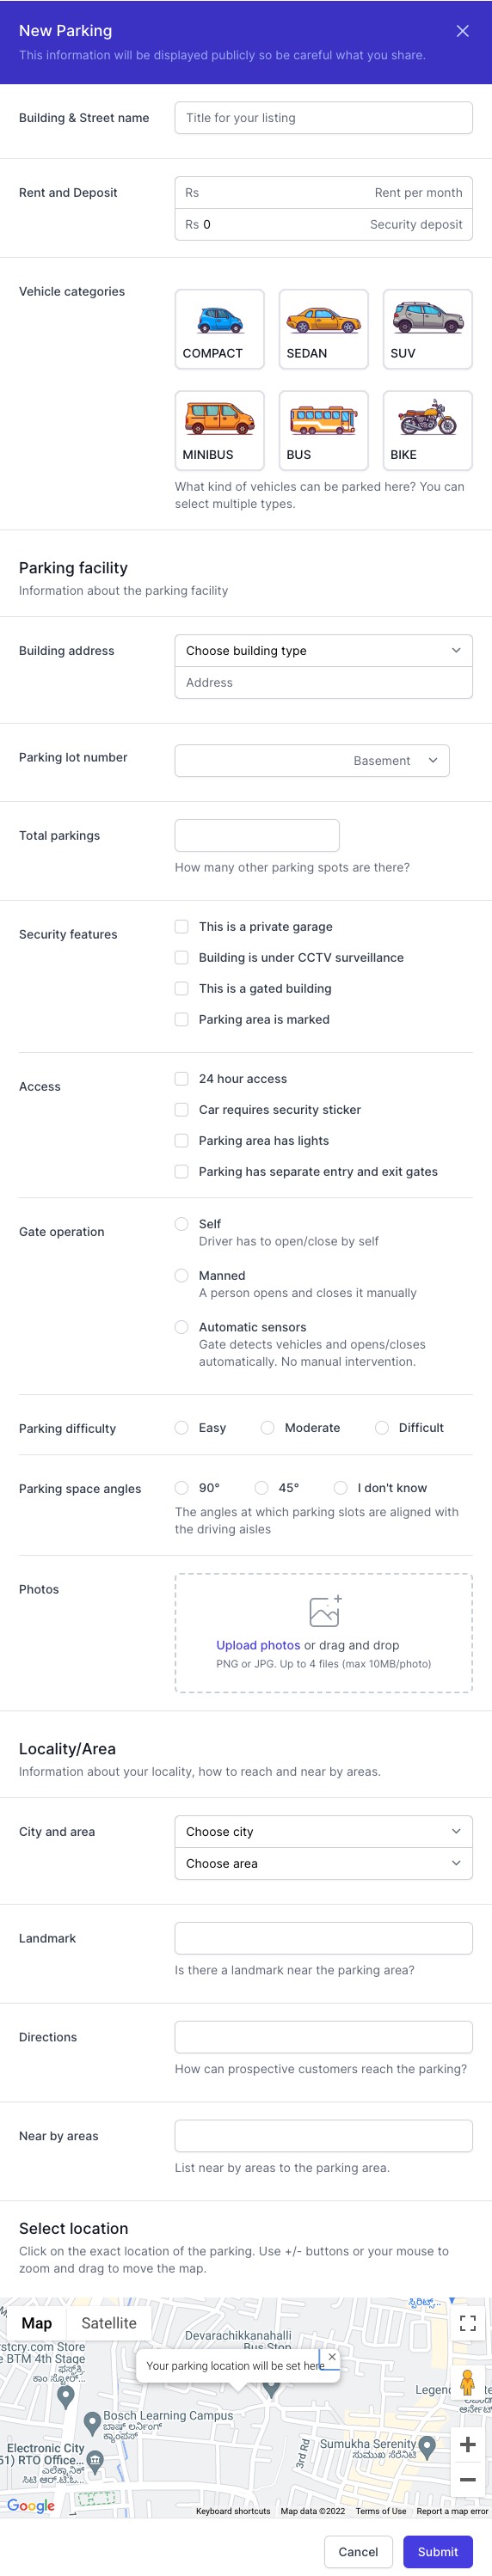 simplyguest-new-parking-form